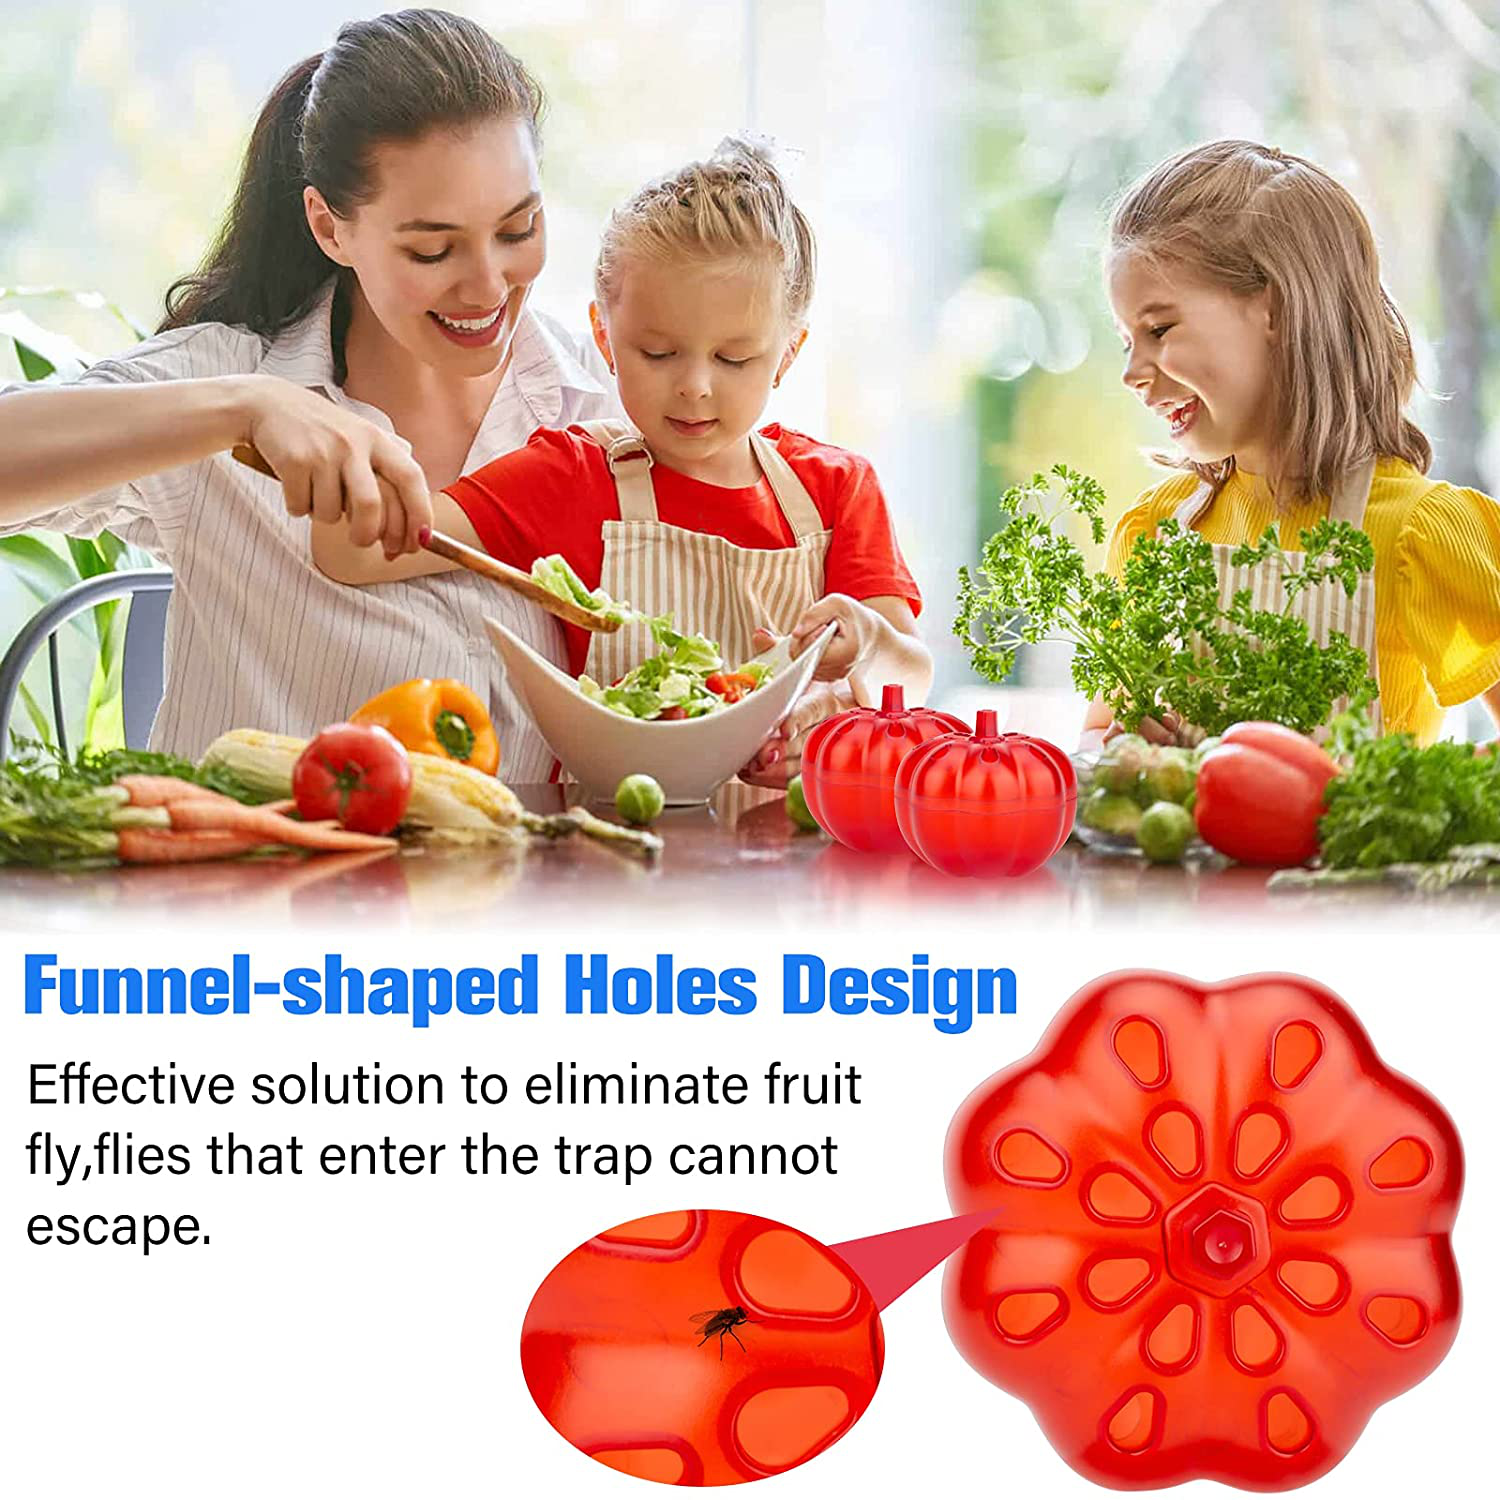 Burxoe Fruit Fly Trap,Reusable Fruit Fly Traps for Kitchen, Fruit Fly Traps Indoor Sticky, Fly Trap Refill,Fly Catcher for Food Areas Safe Non-Toxic Odorless 2 Packs Pumpkin Shape